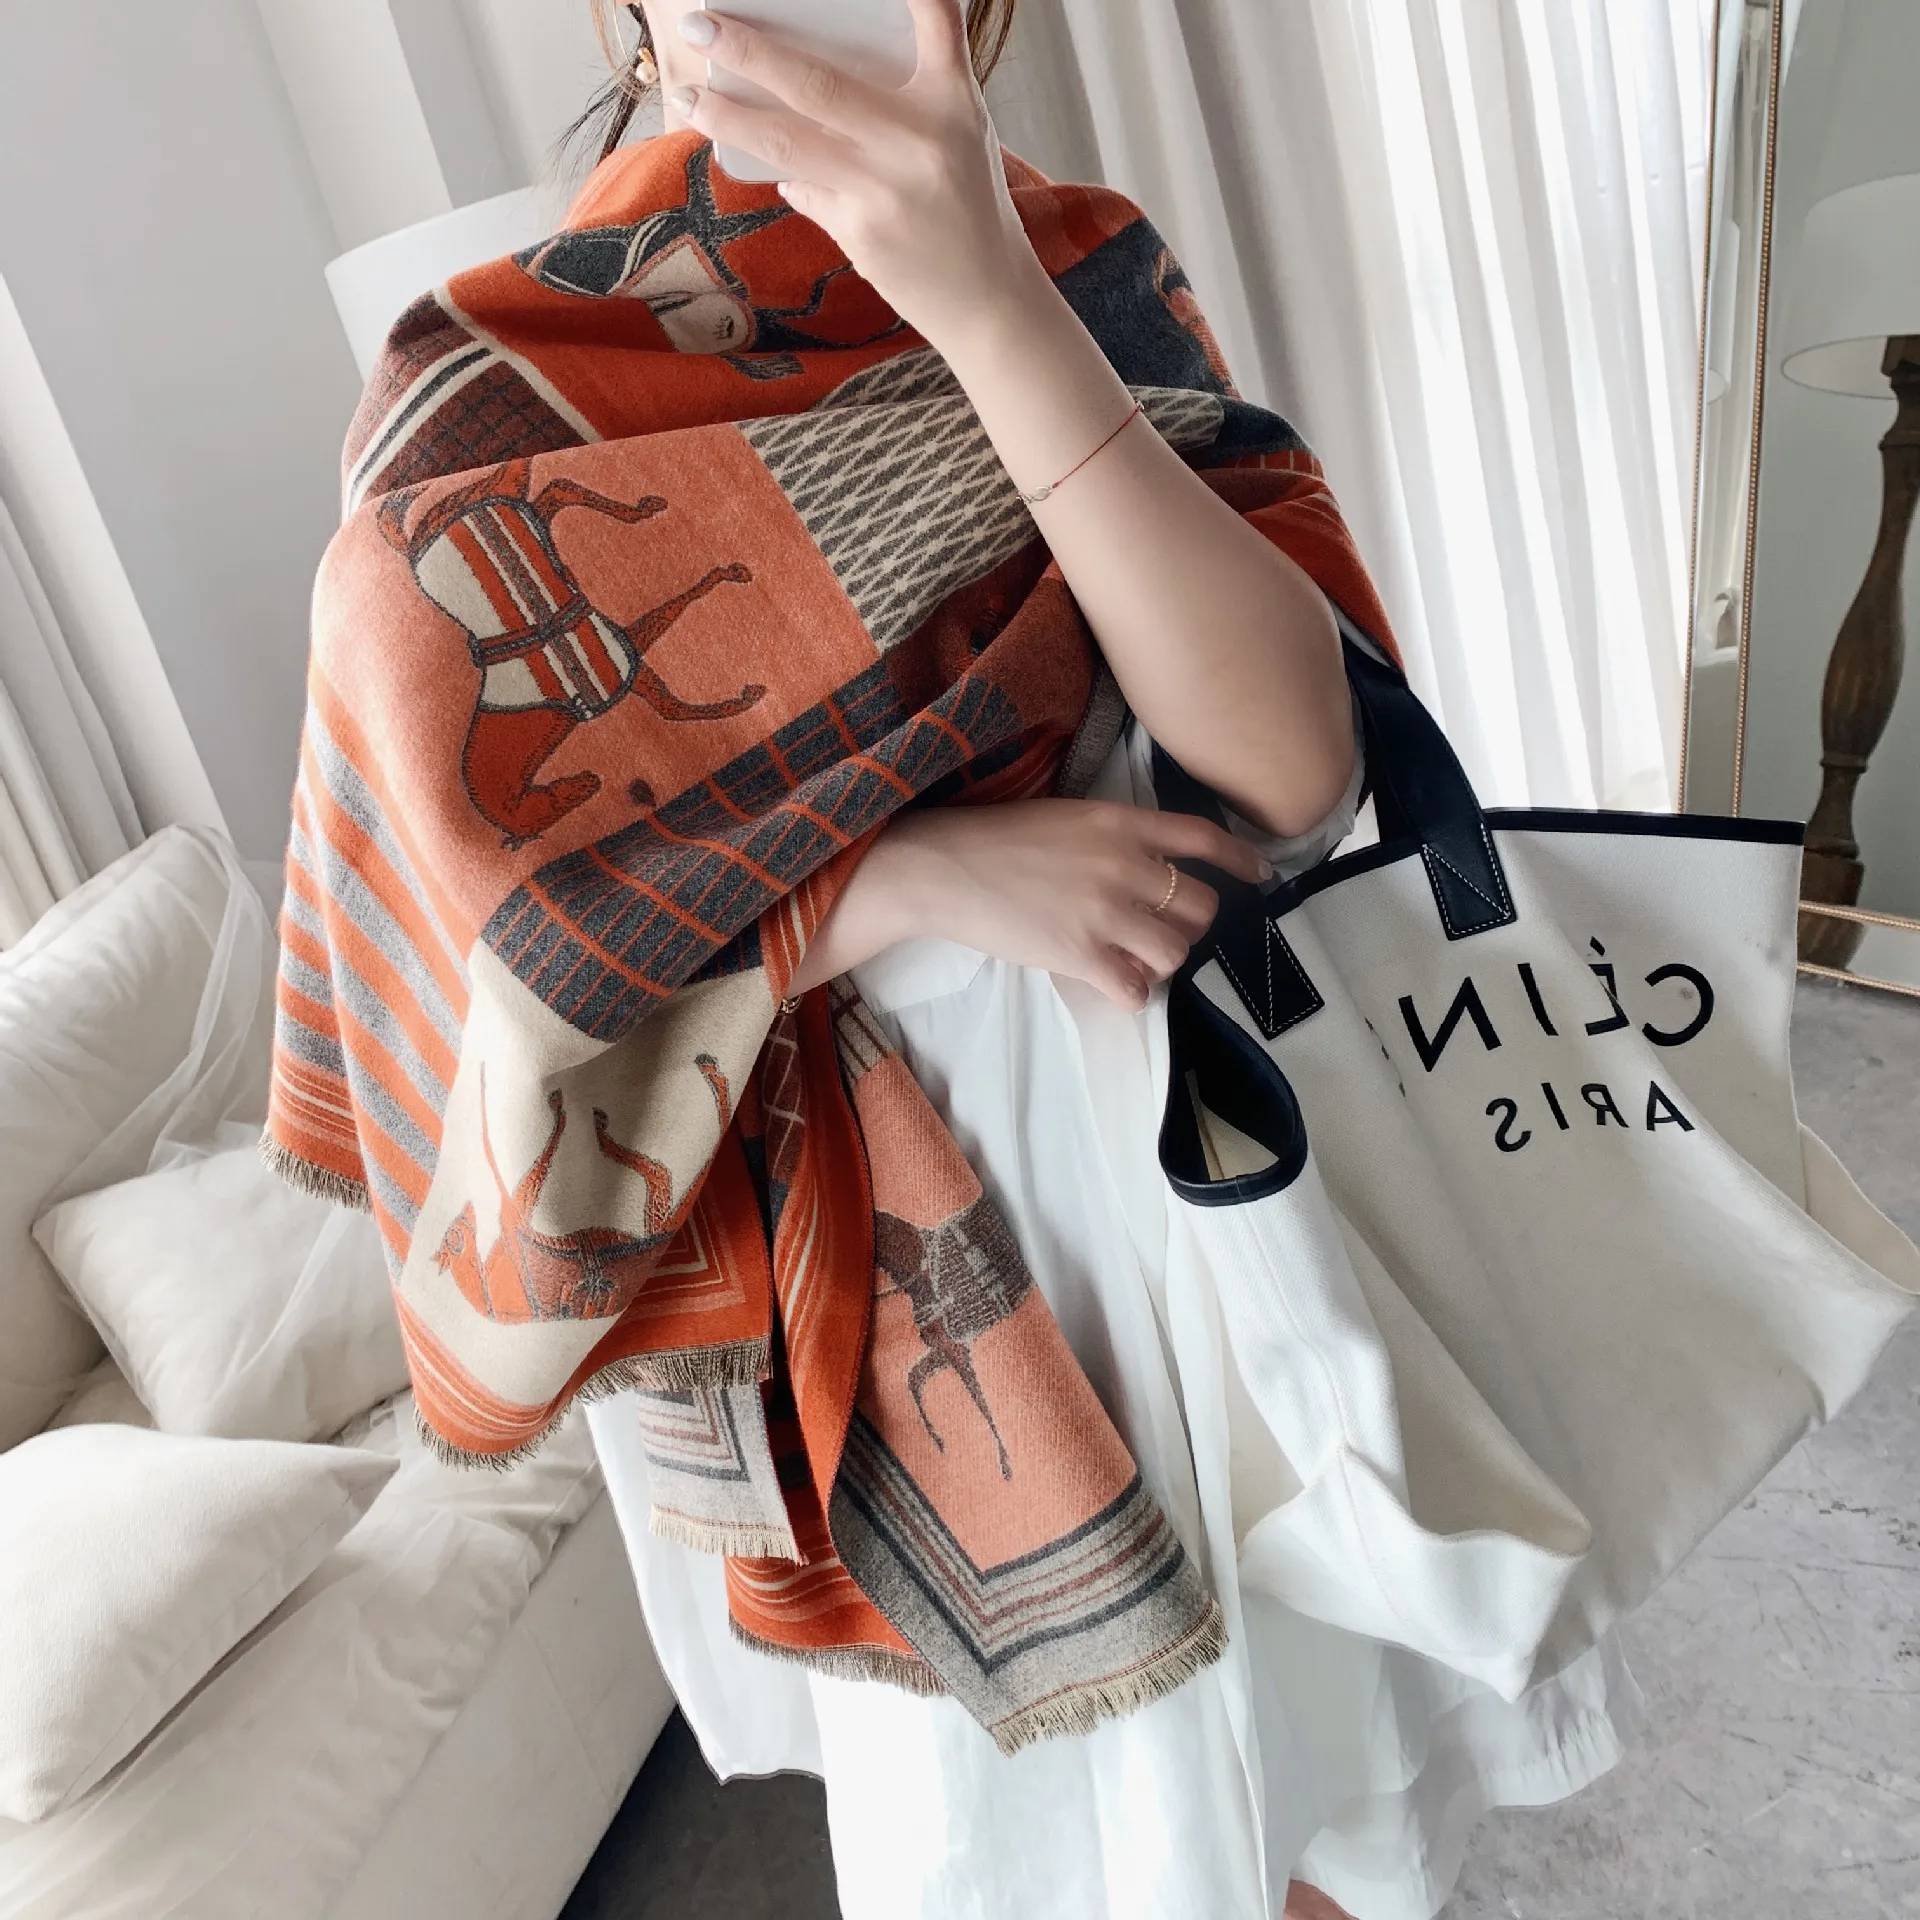 Winter Scarf Women Cashmere Shawls Fashion Warm Foulard Lady Air-conditioned office Scarves Thick Soft Wraps size 180X70CM mai888a